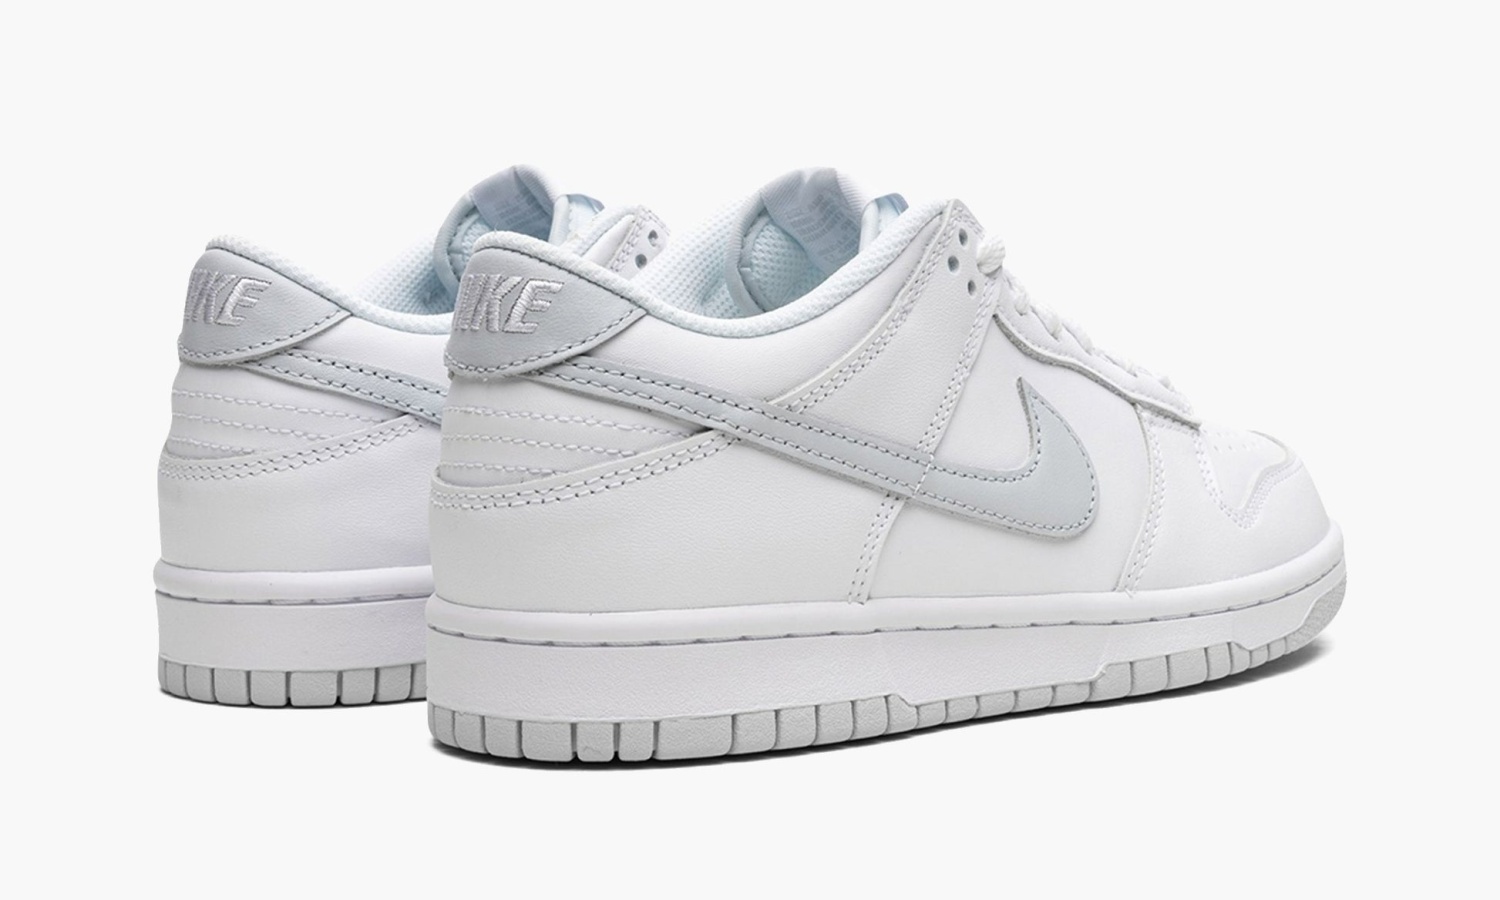 фото Dunk Low GS "White Pure Platinum" (Nike Dunk Low)-DH9765 102